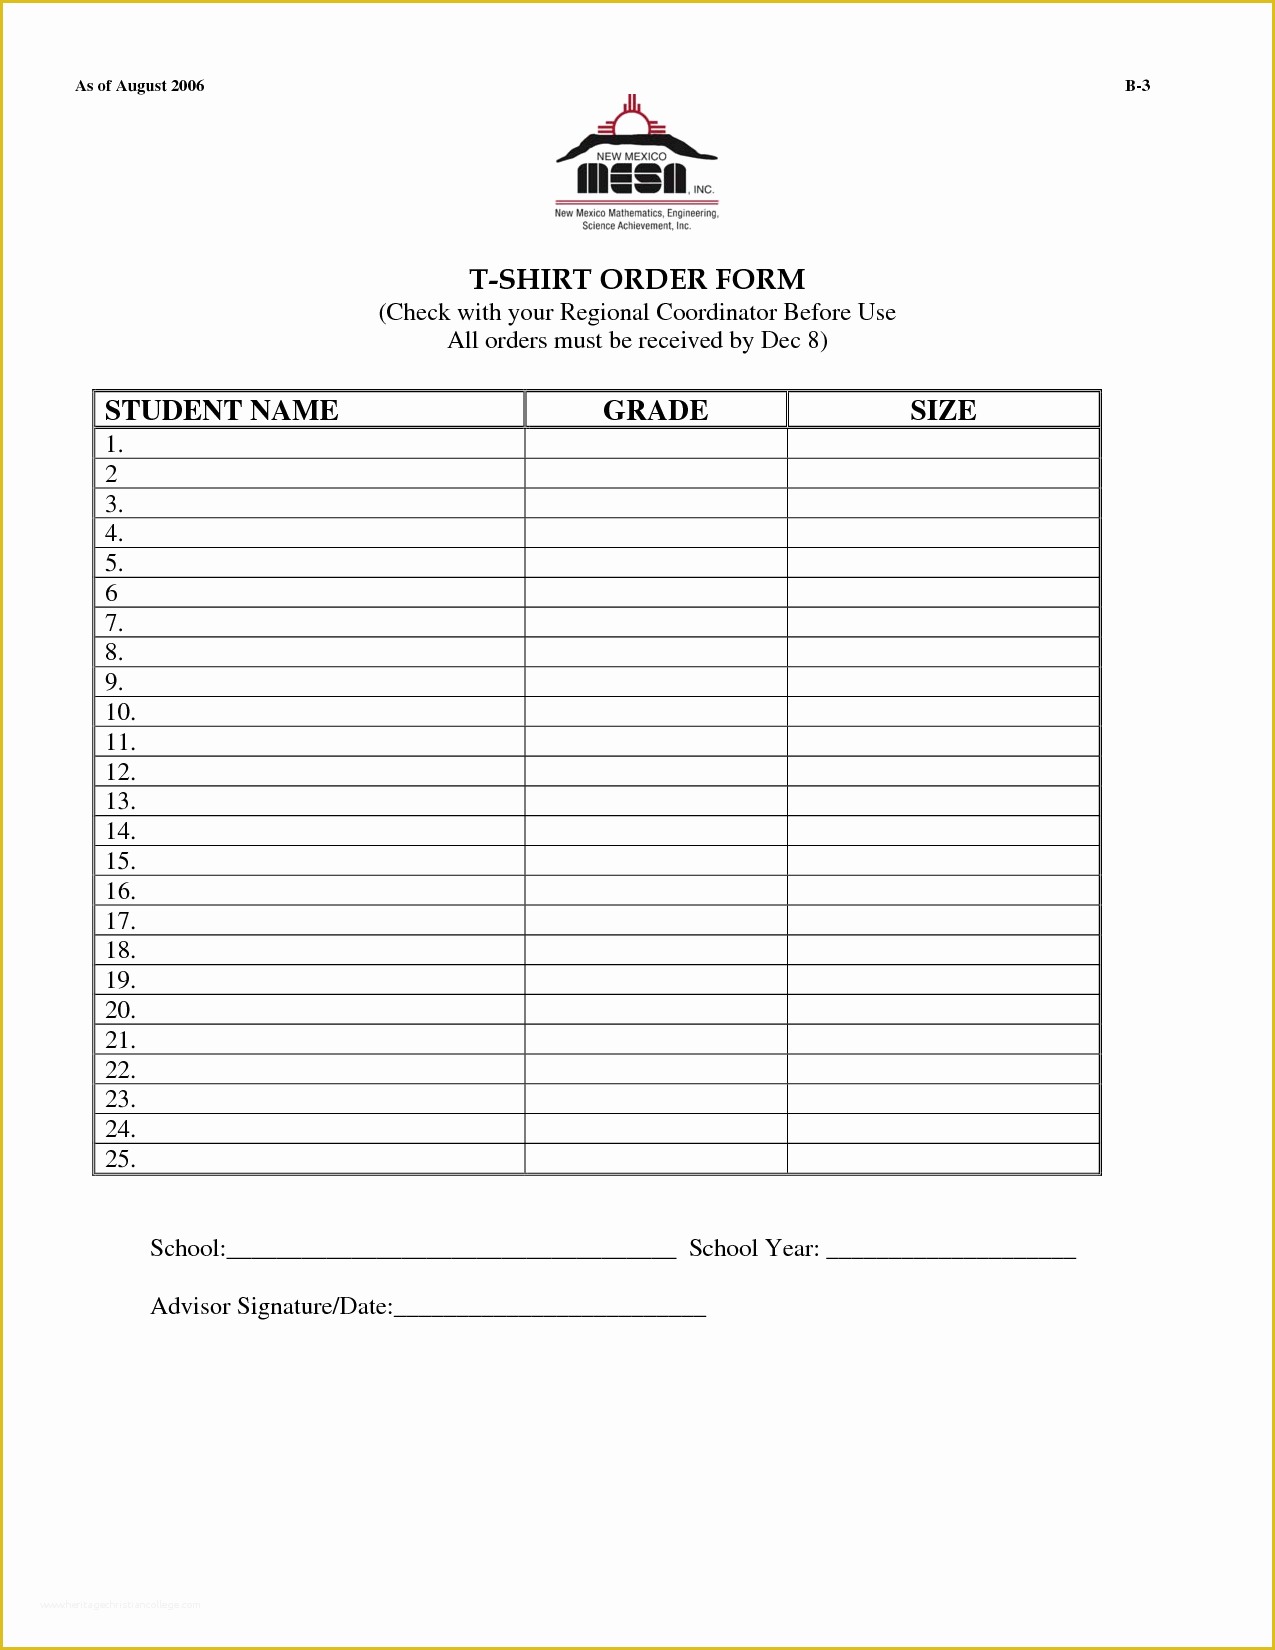 Merchandise order form Template Free Of Product order form Template Free Portablegasgrillweber